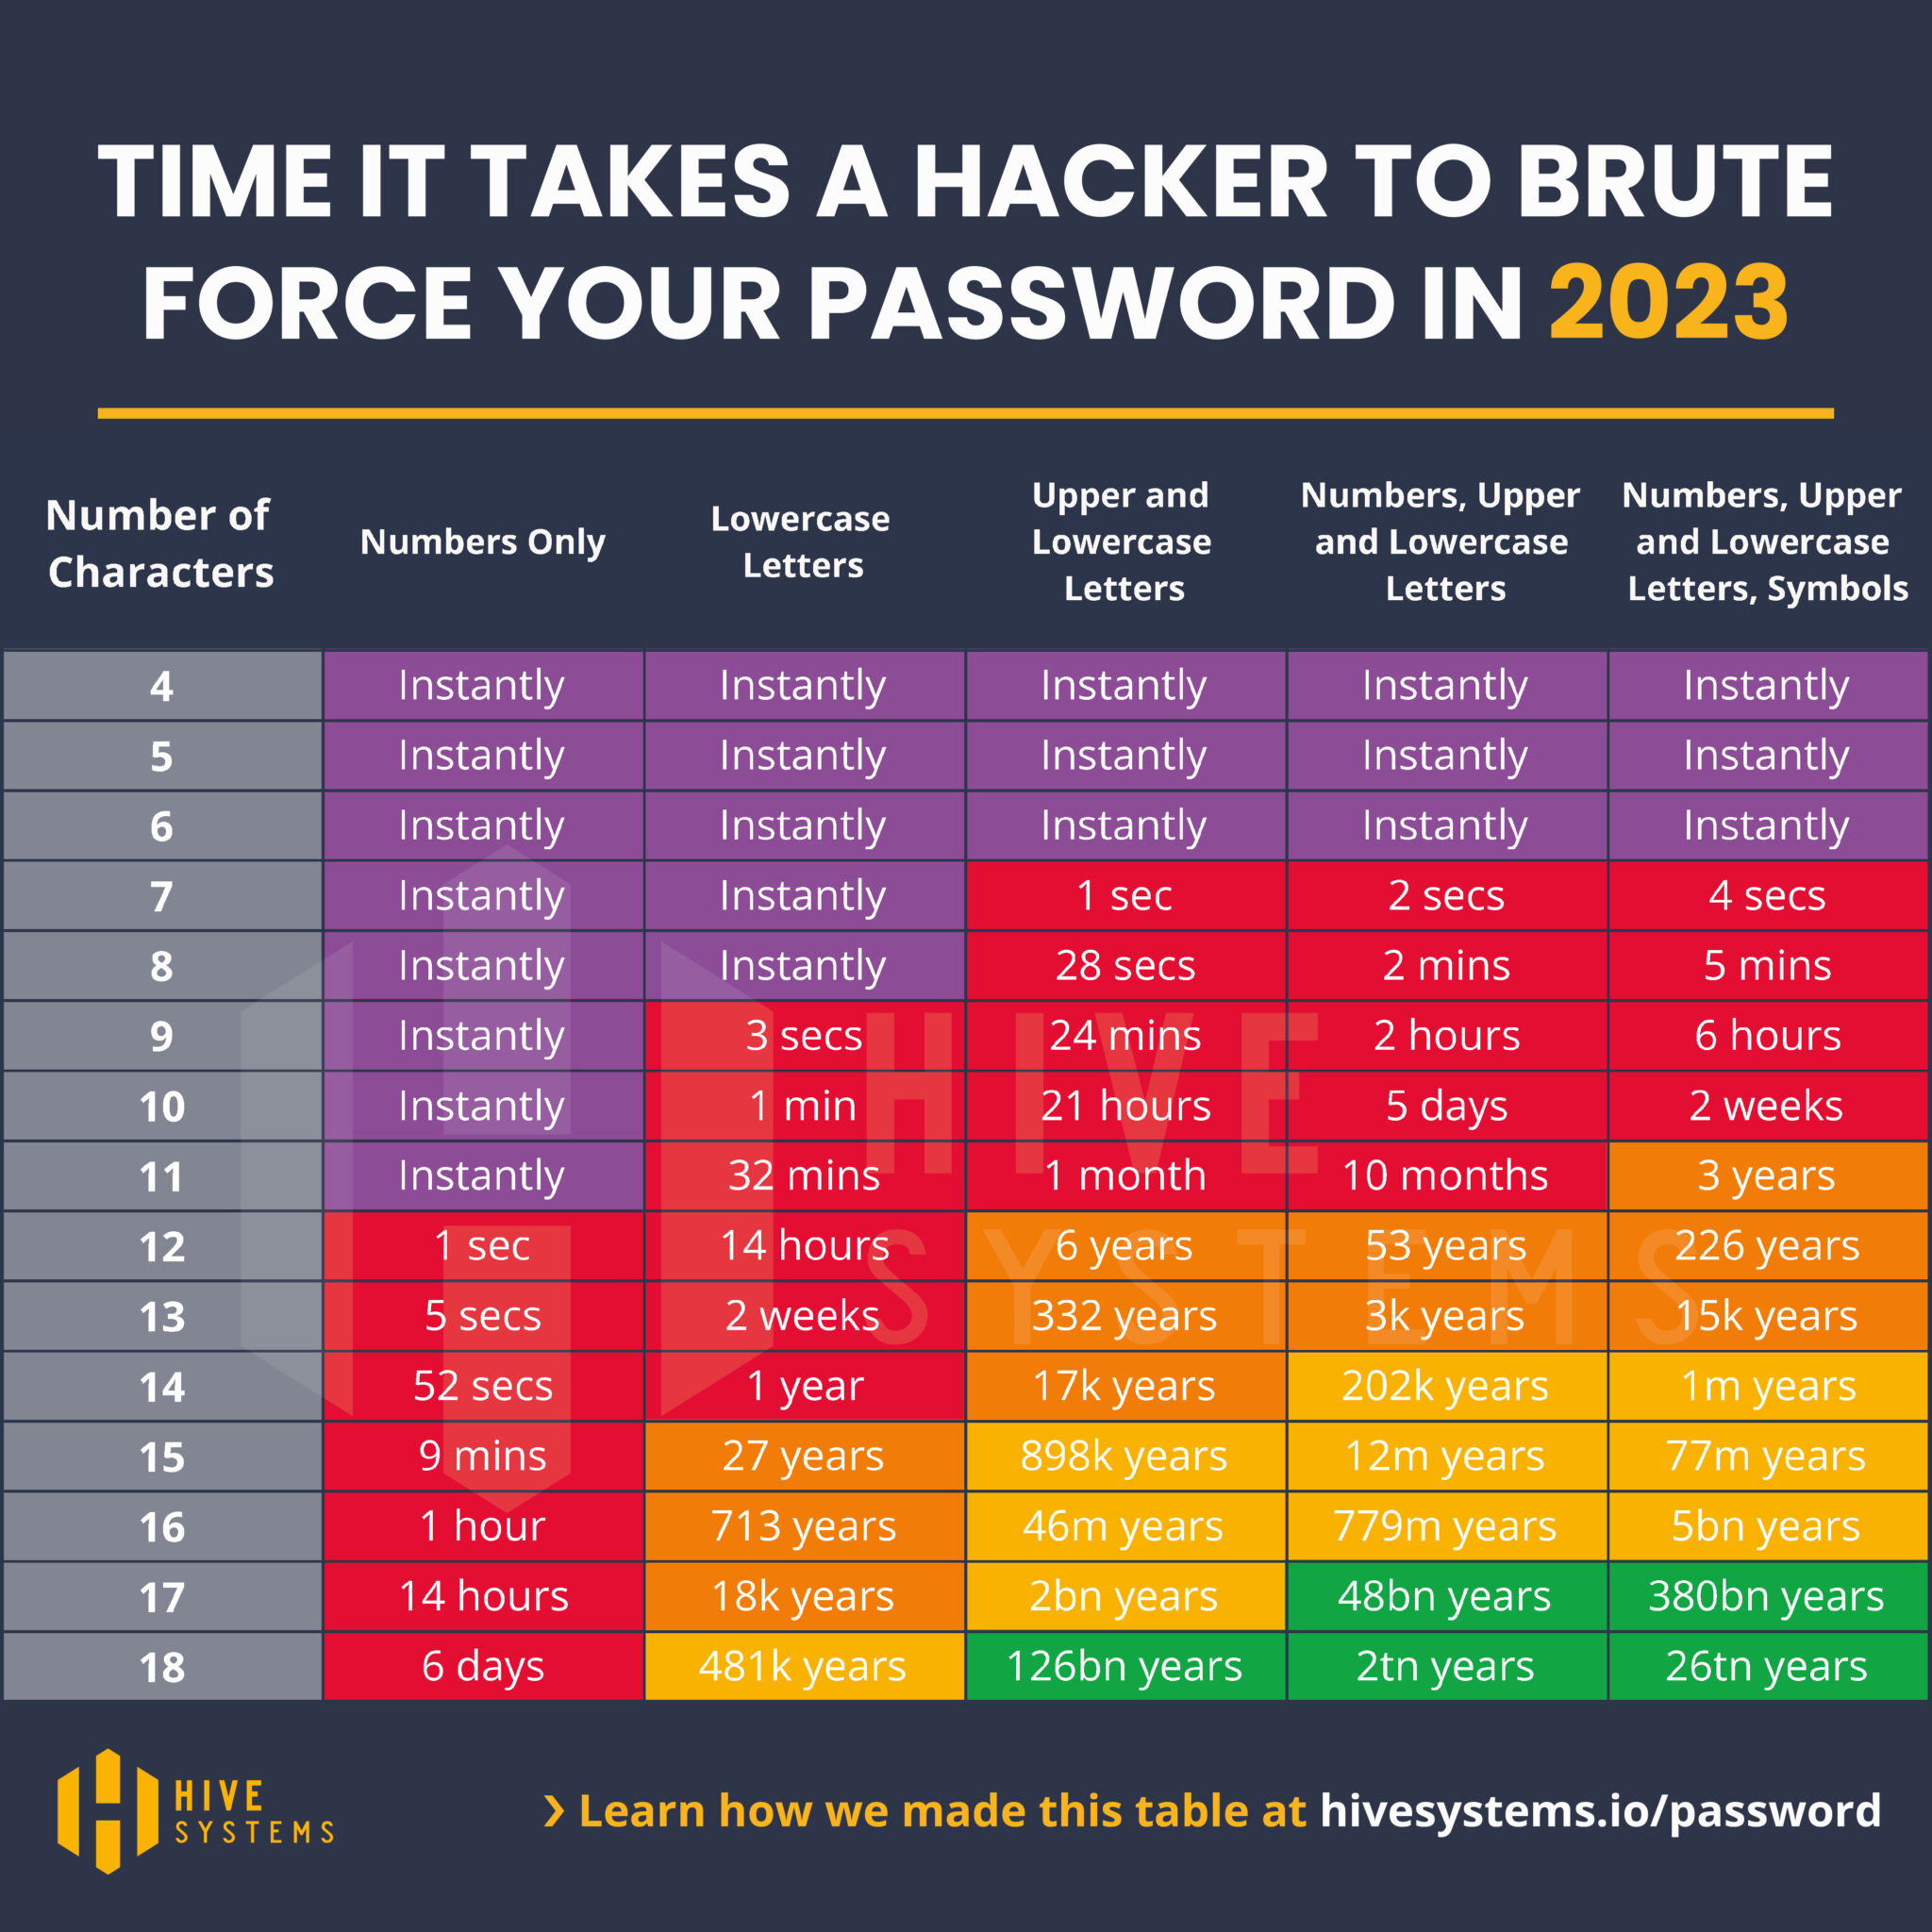 2023-Password-Table_Square-Hive-Systems-2048x2048.jpg